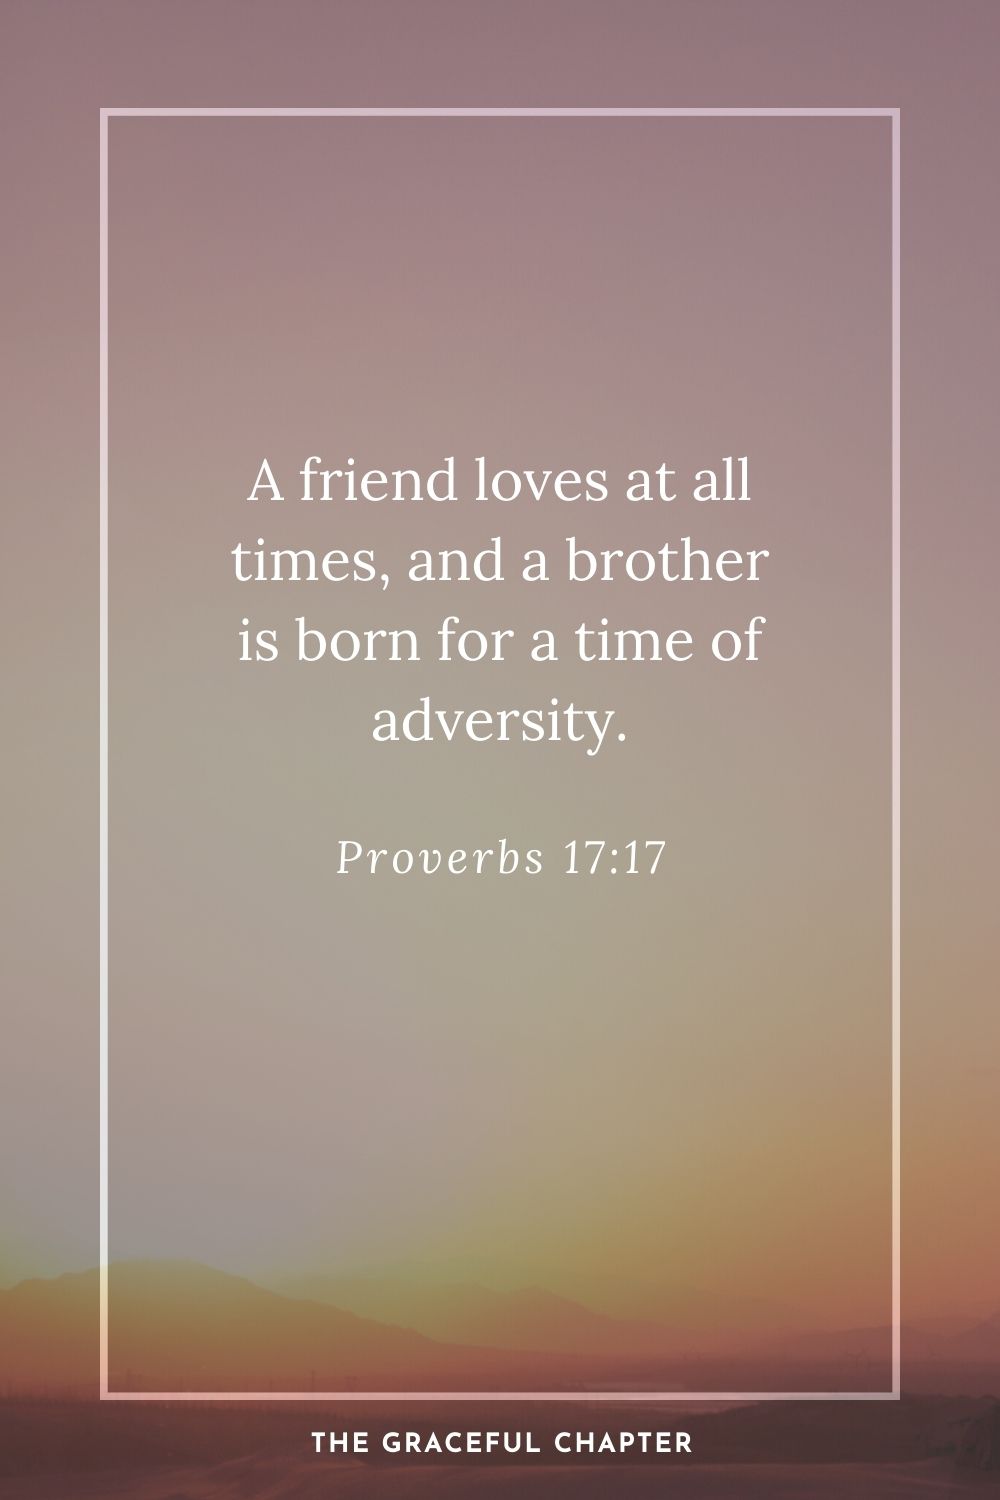 A friend loves at all times, and a brother is born for a time of adversity. Proverbs 17:17